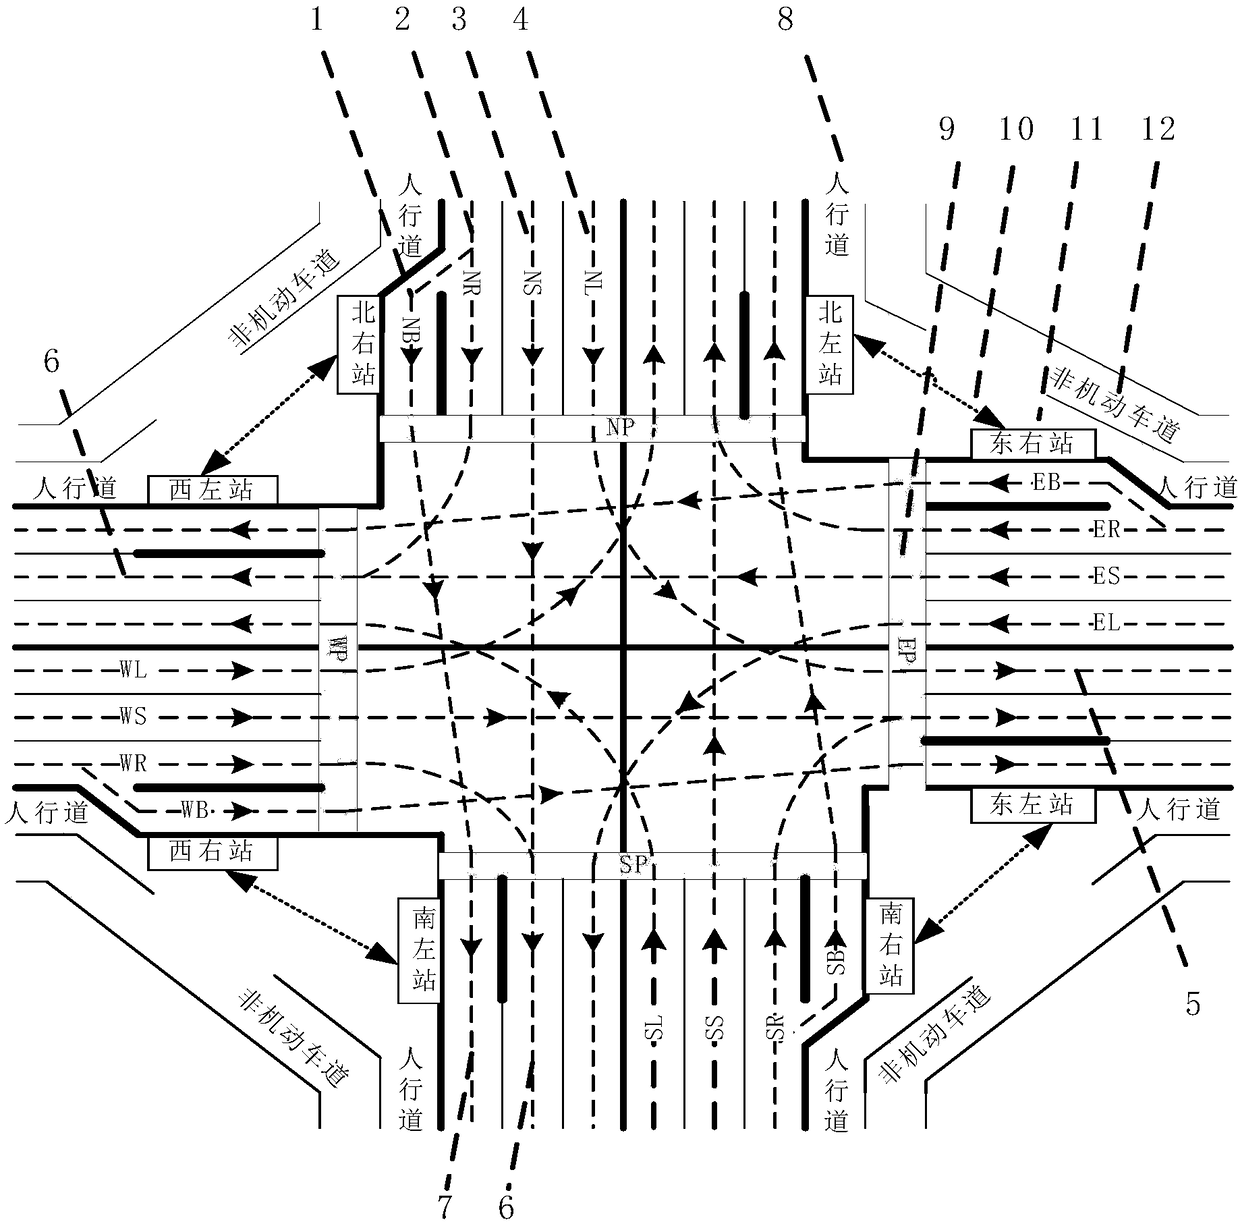 Layout, traffic control and transfer plan of one-way one-line mode intersection